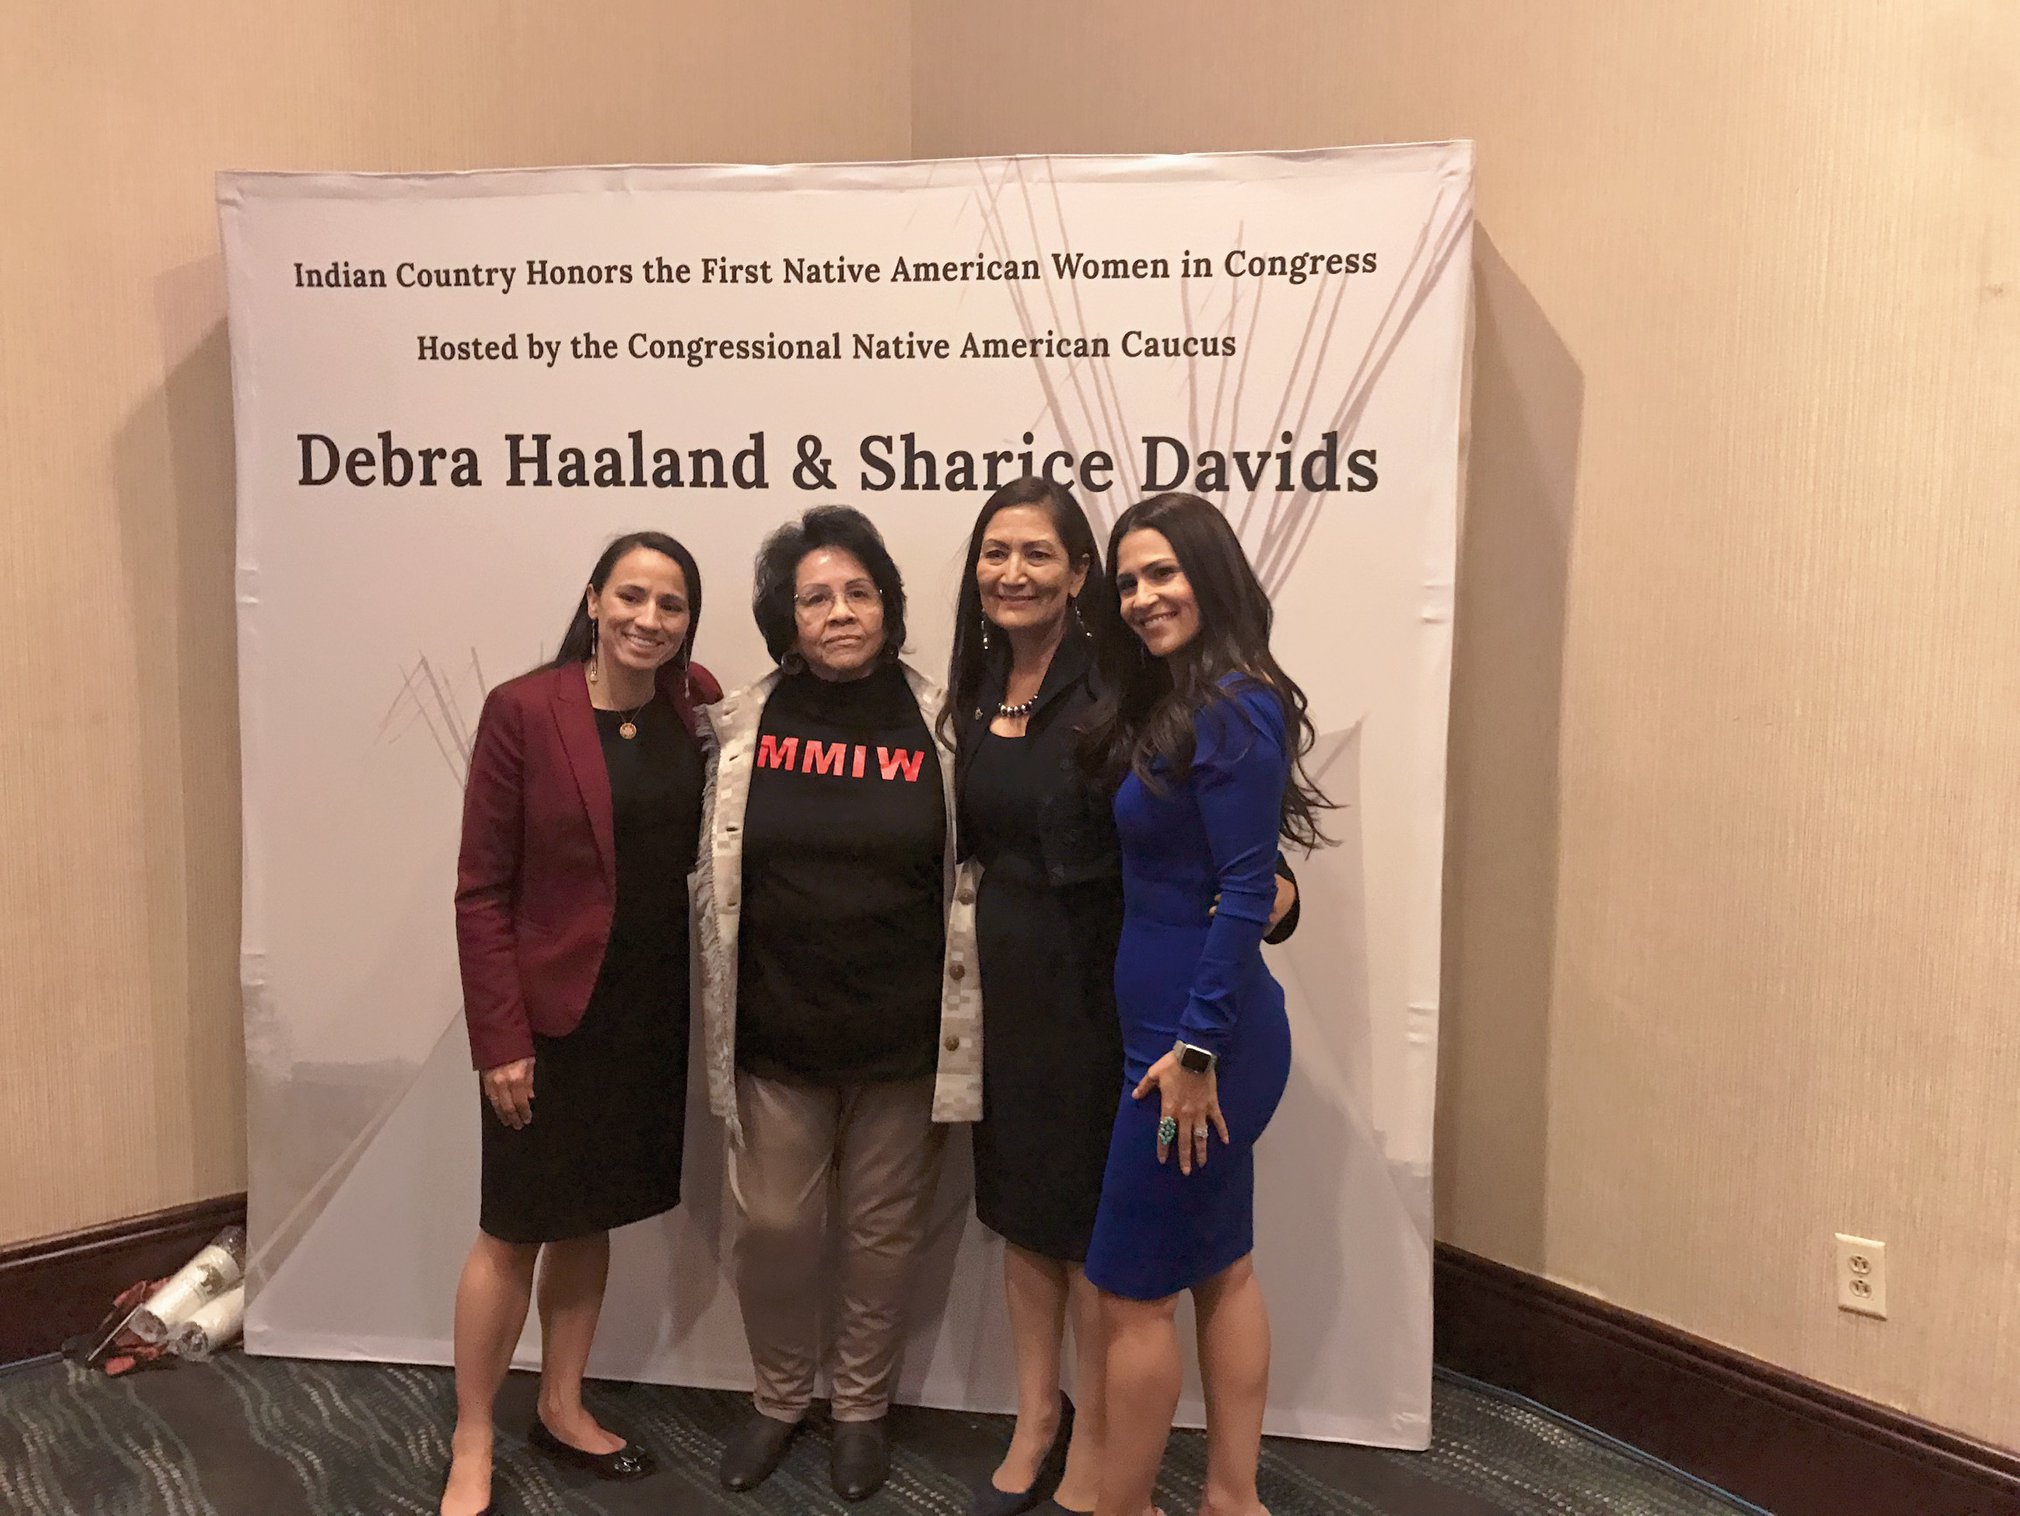 Sharice Davids, Mary Ann Martin Andreas, Debra Haaland, and Dr. Joely Proudfit standing together in front of a backdrop that states, "Indian Country Honors the First Native American Women in Congress Hosted by the Congressional Native American Caucus, Debra Haaland & Sharice Davids"